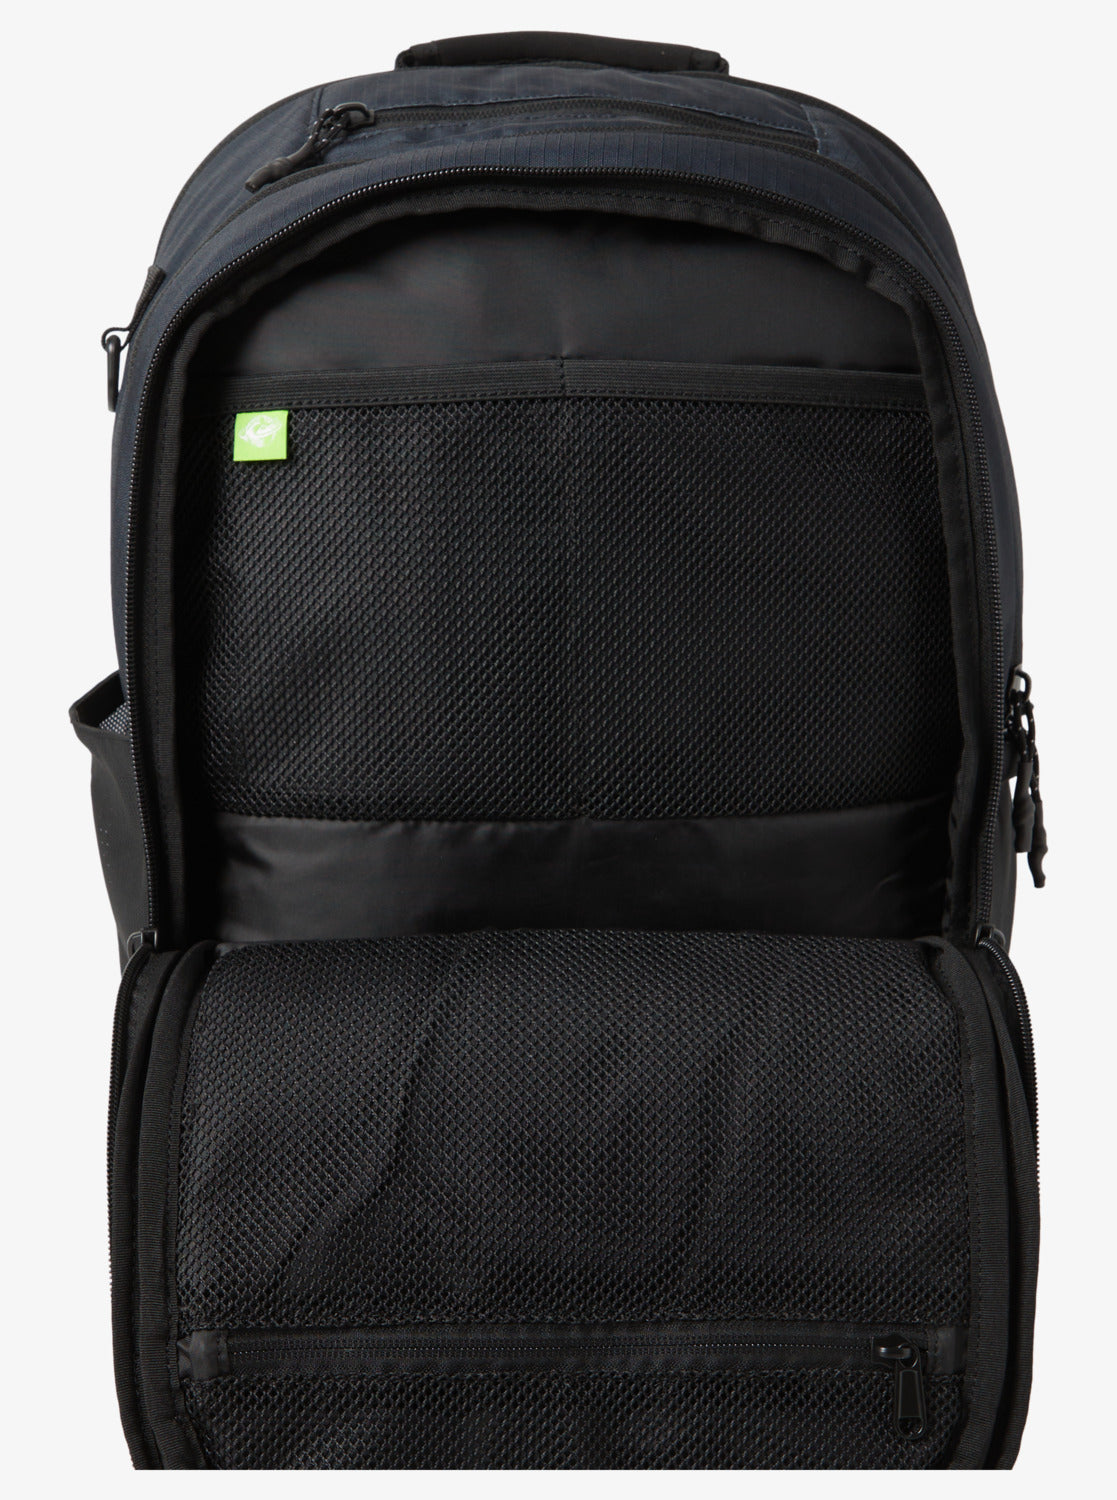 Quiksilver Freeday 28 Litre Backpack Black Colourway insideView